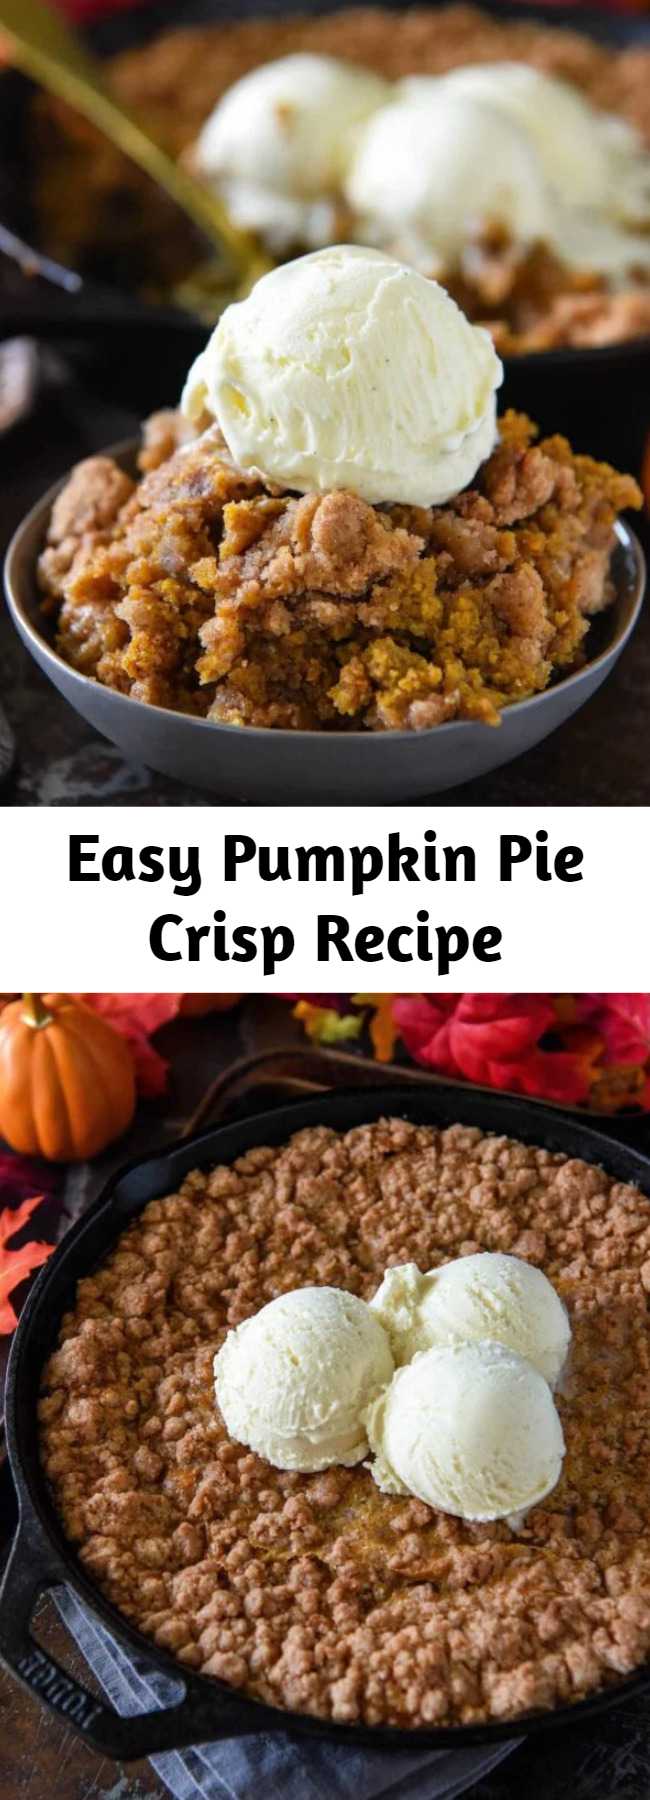 Easy Pumpkin Pie Crisp Recipe - This Pumpkin Crisp is an easy fall dessert made with a creamy pumpkin pie filling and a crunchy golden cinnamon streusel and then served warm with ice cream! #PumpkinPieCrisp #PumpkinCrisp #Pumpkin #PumpkinRecipes #PumpkinCobbler #PumpkinDesserts #FallRecipes #FallDesserts #Cobbler